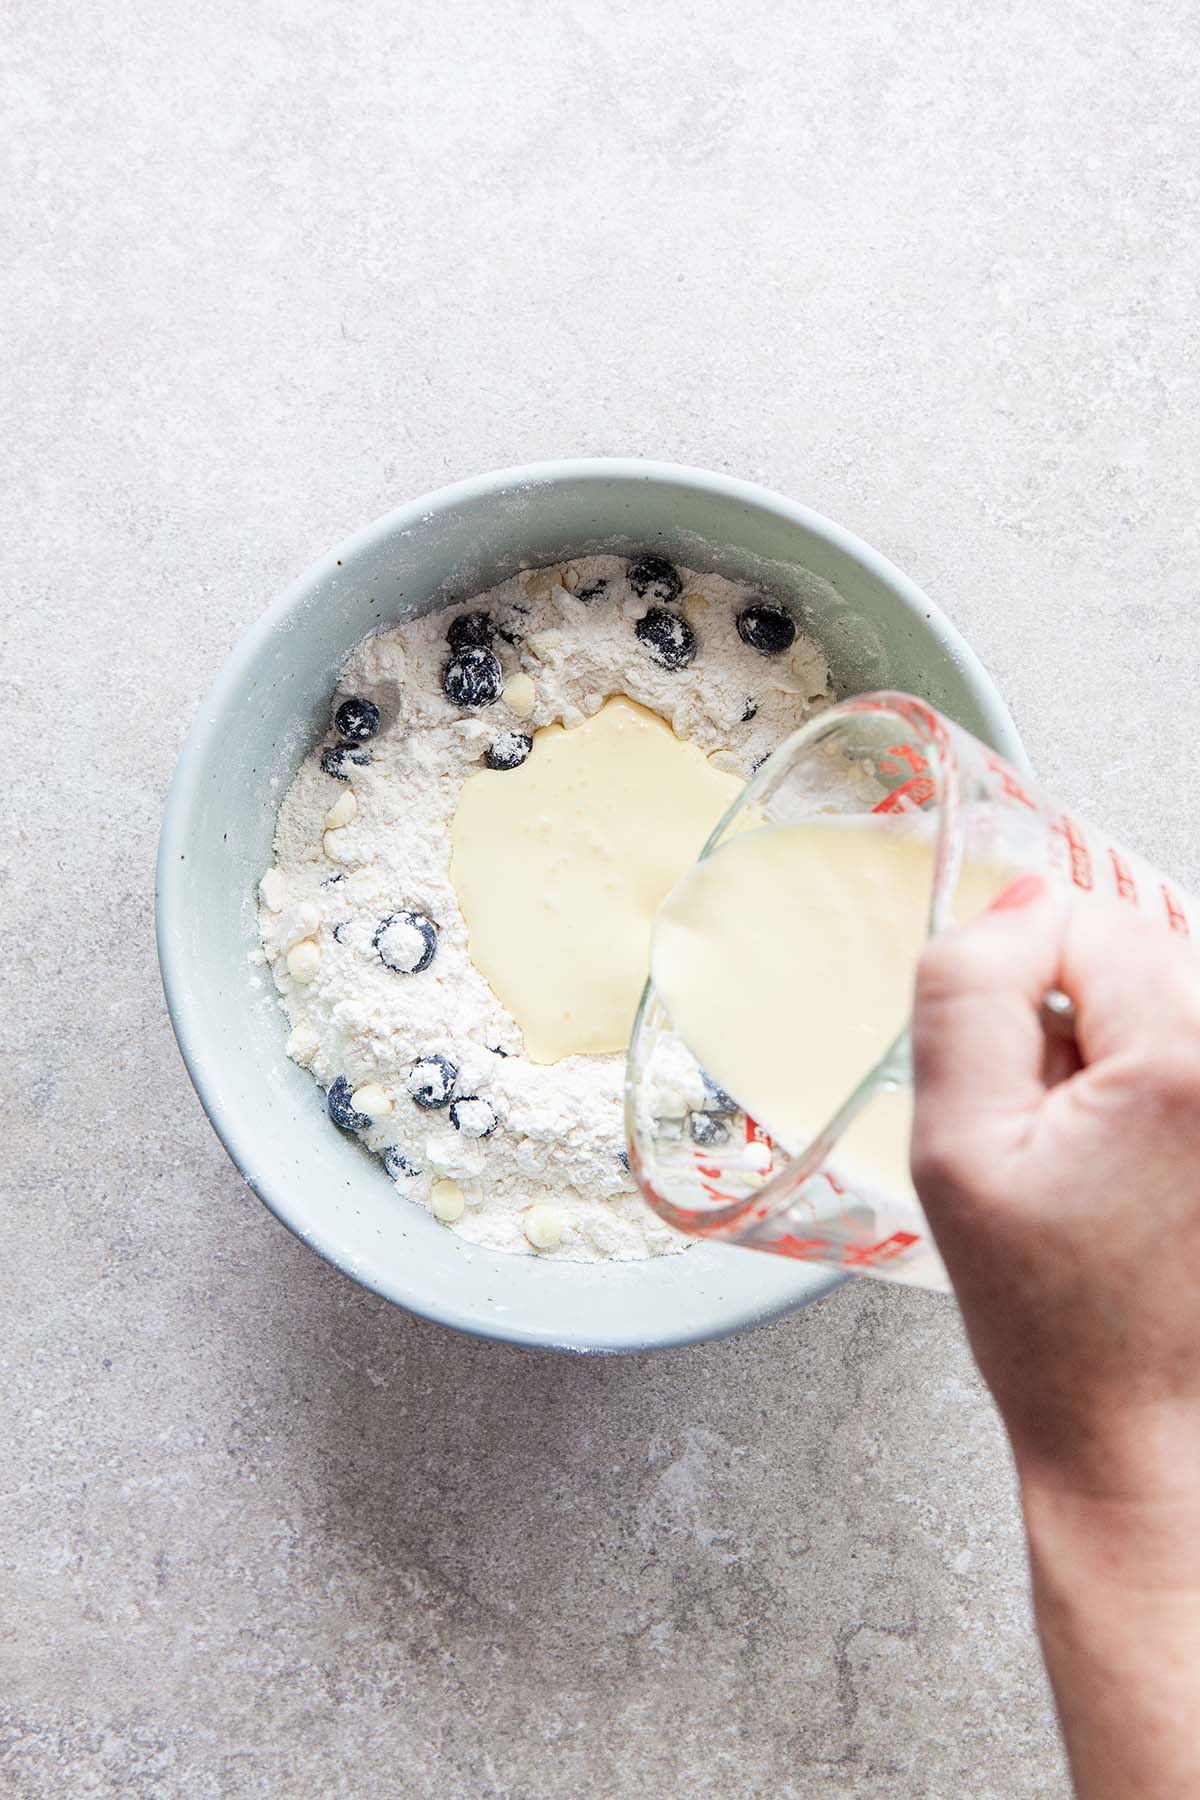 A hand pouring cream into a bowl filled with flour, blueberries, and white chocolate chips.